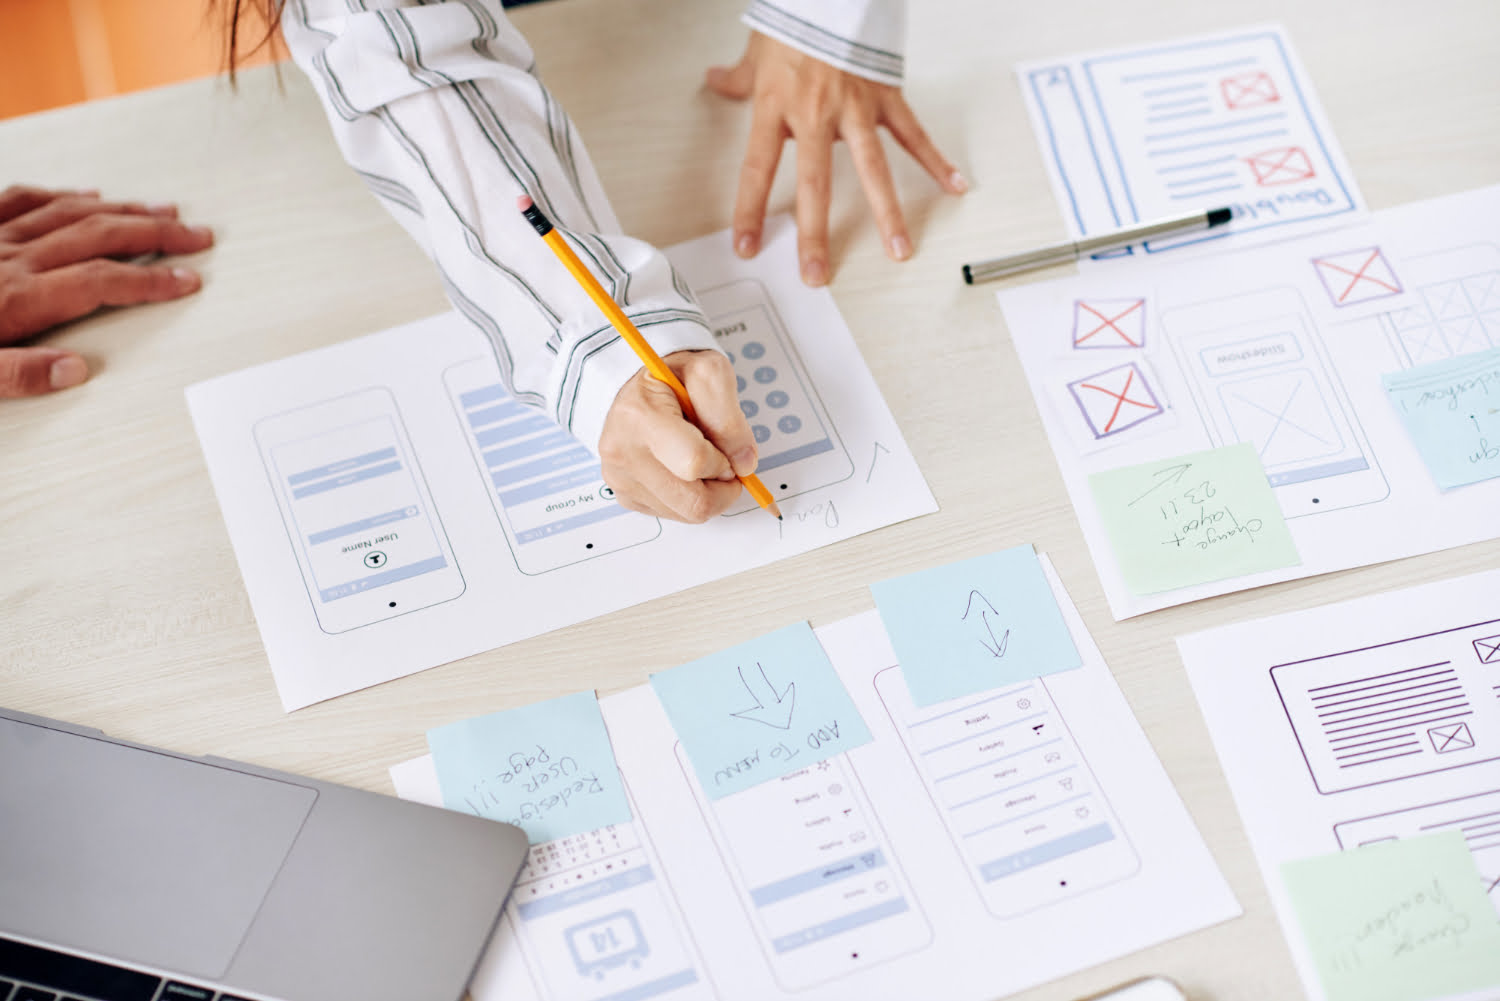 What is Wireframing and How Can Business Owners Benefit?